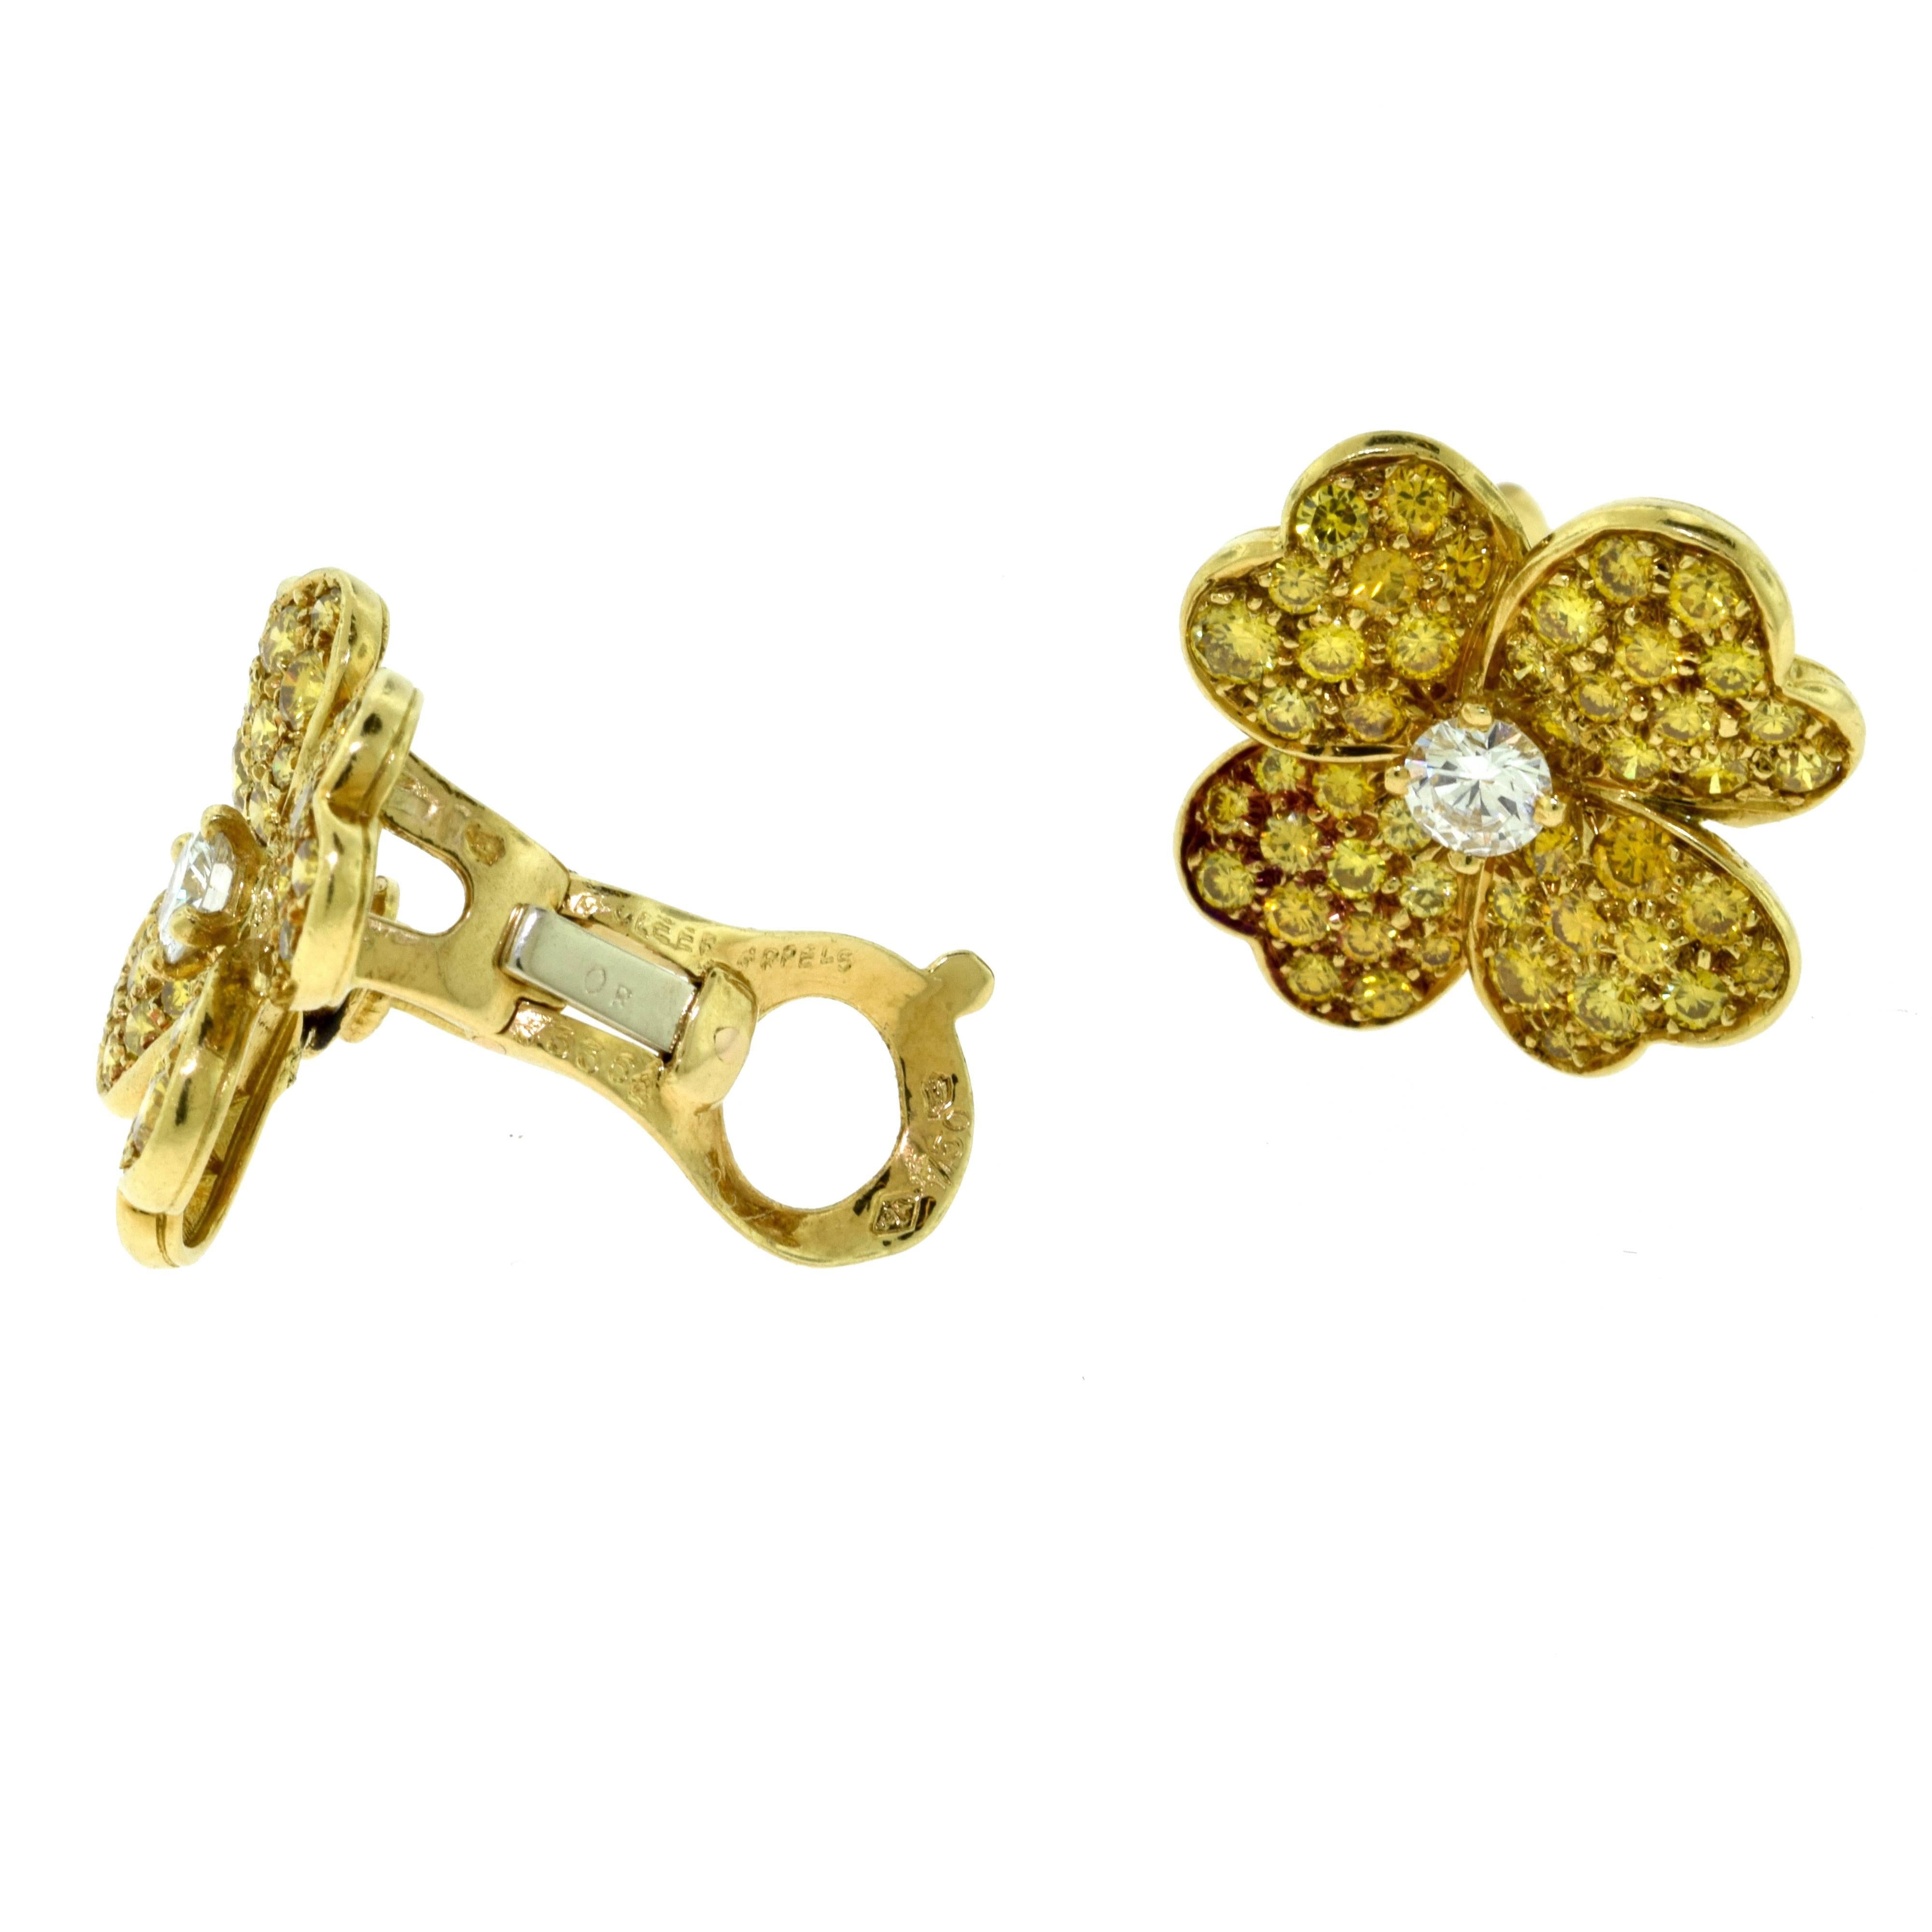 Van Cleef & Arpels Lg. Yellow Diamond Cosmos Flower Earrings Diamond Centre In Excellent Condition For Sale In Miami, FL